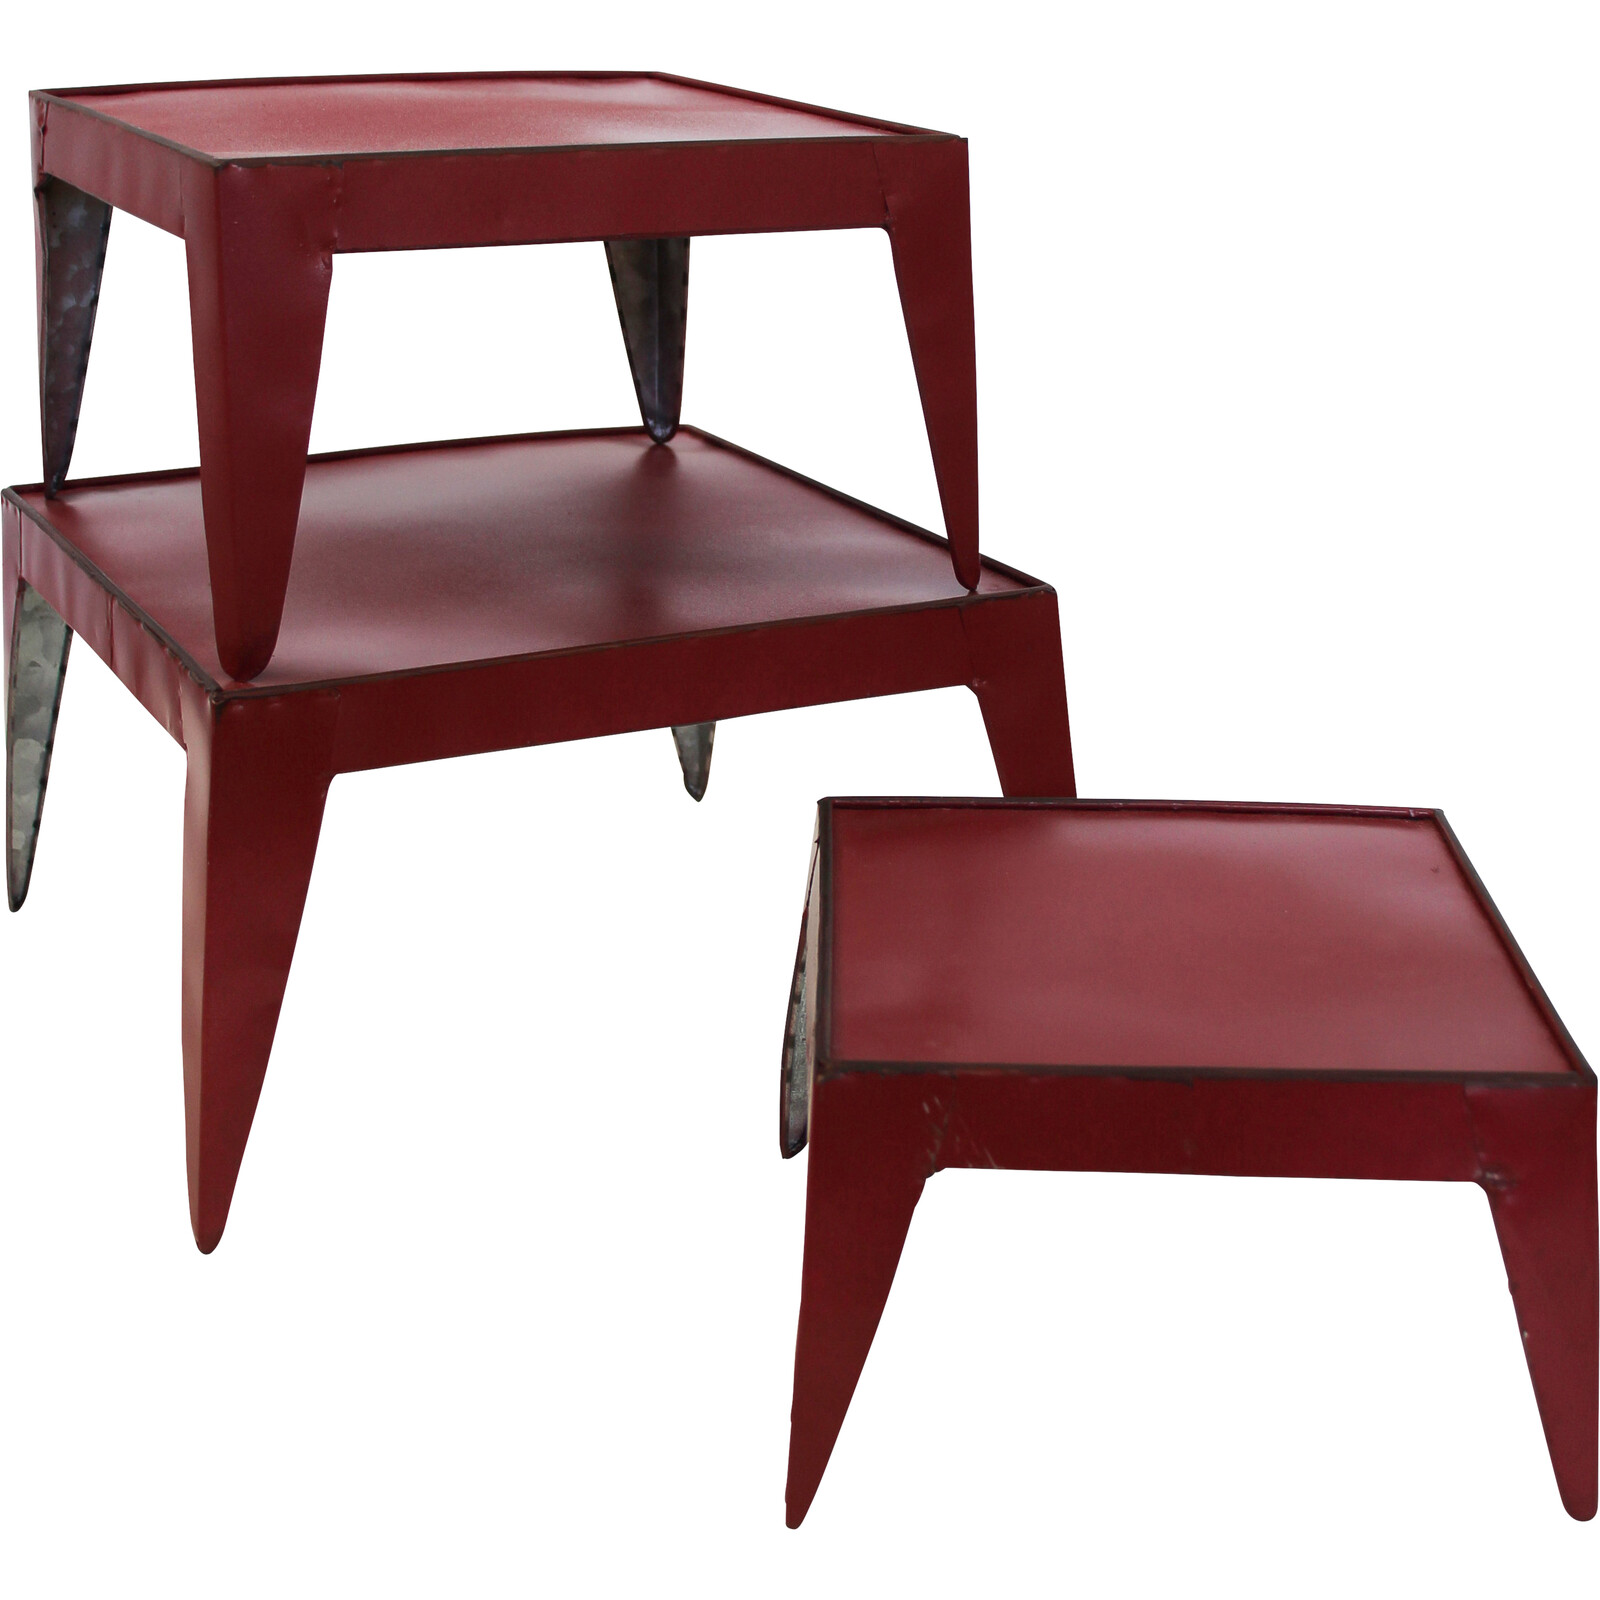 Display Stand S/3 Red